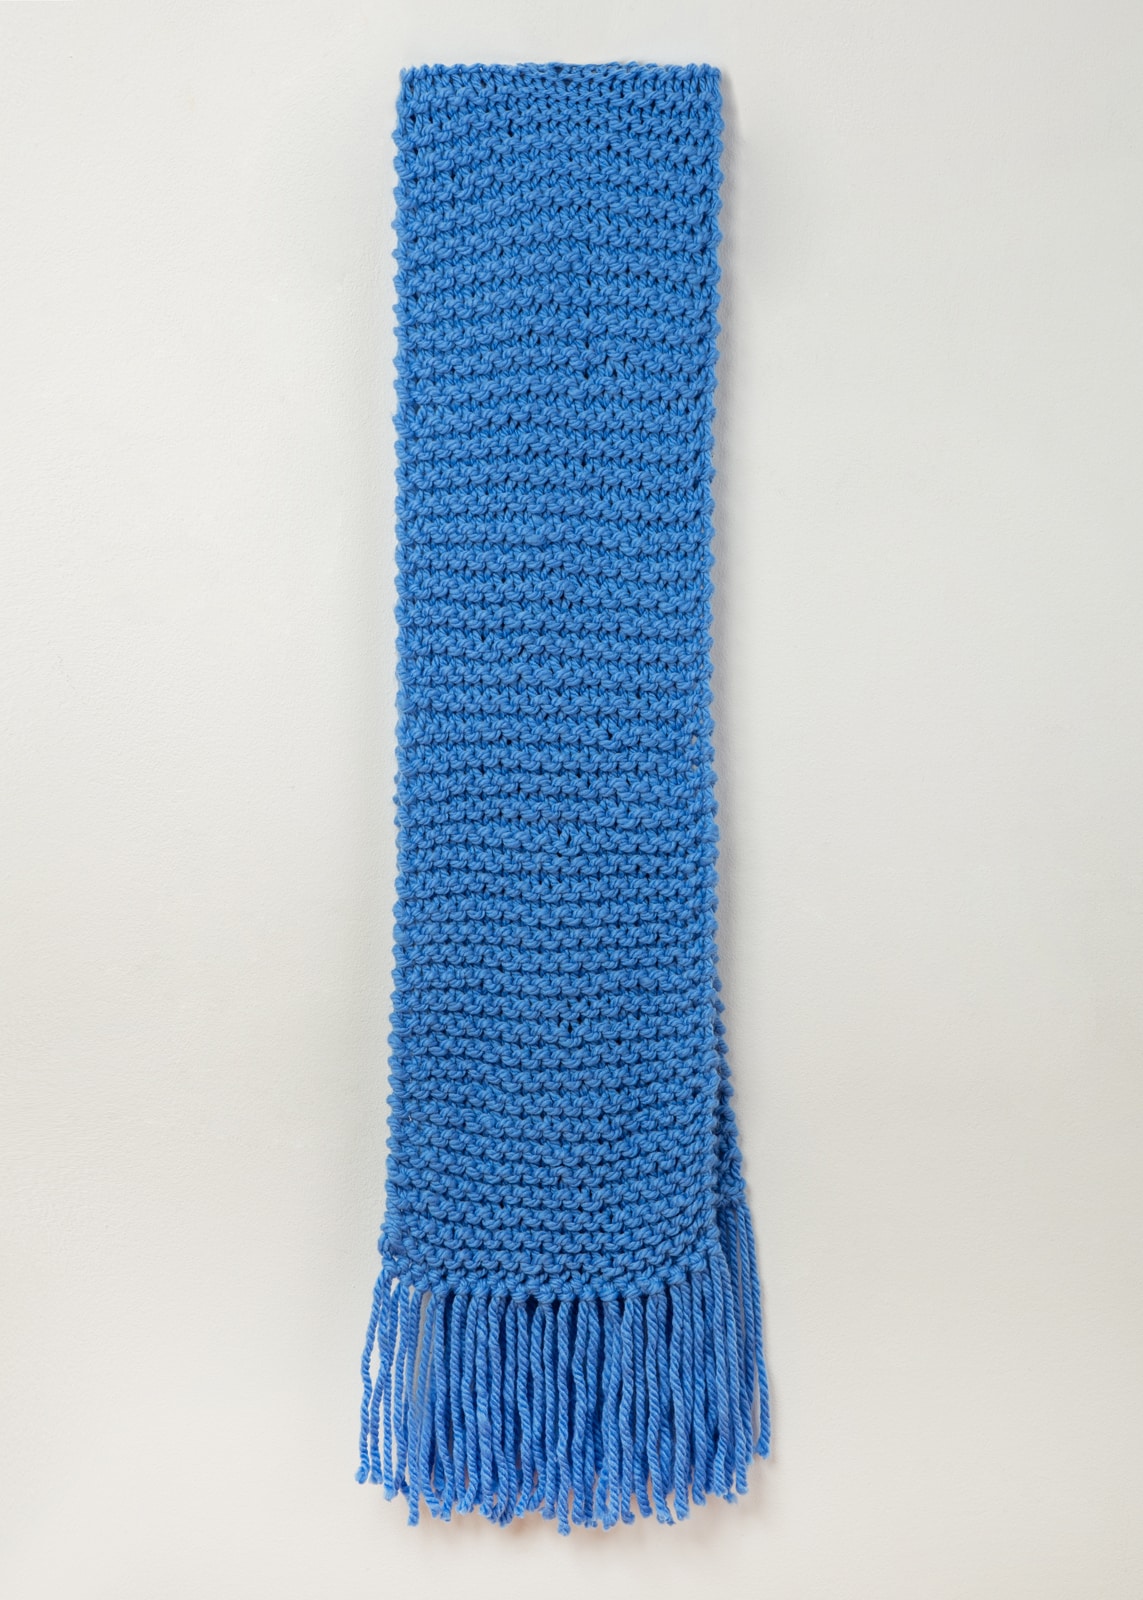 SCARF HANDMADE KNITTED BLUE